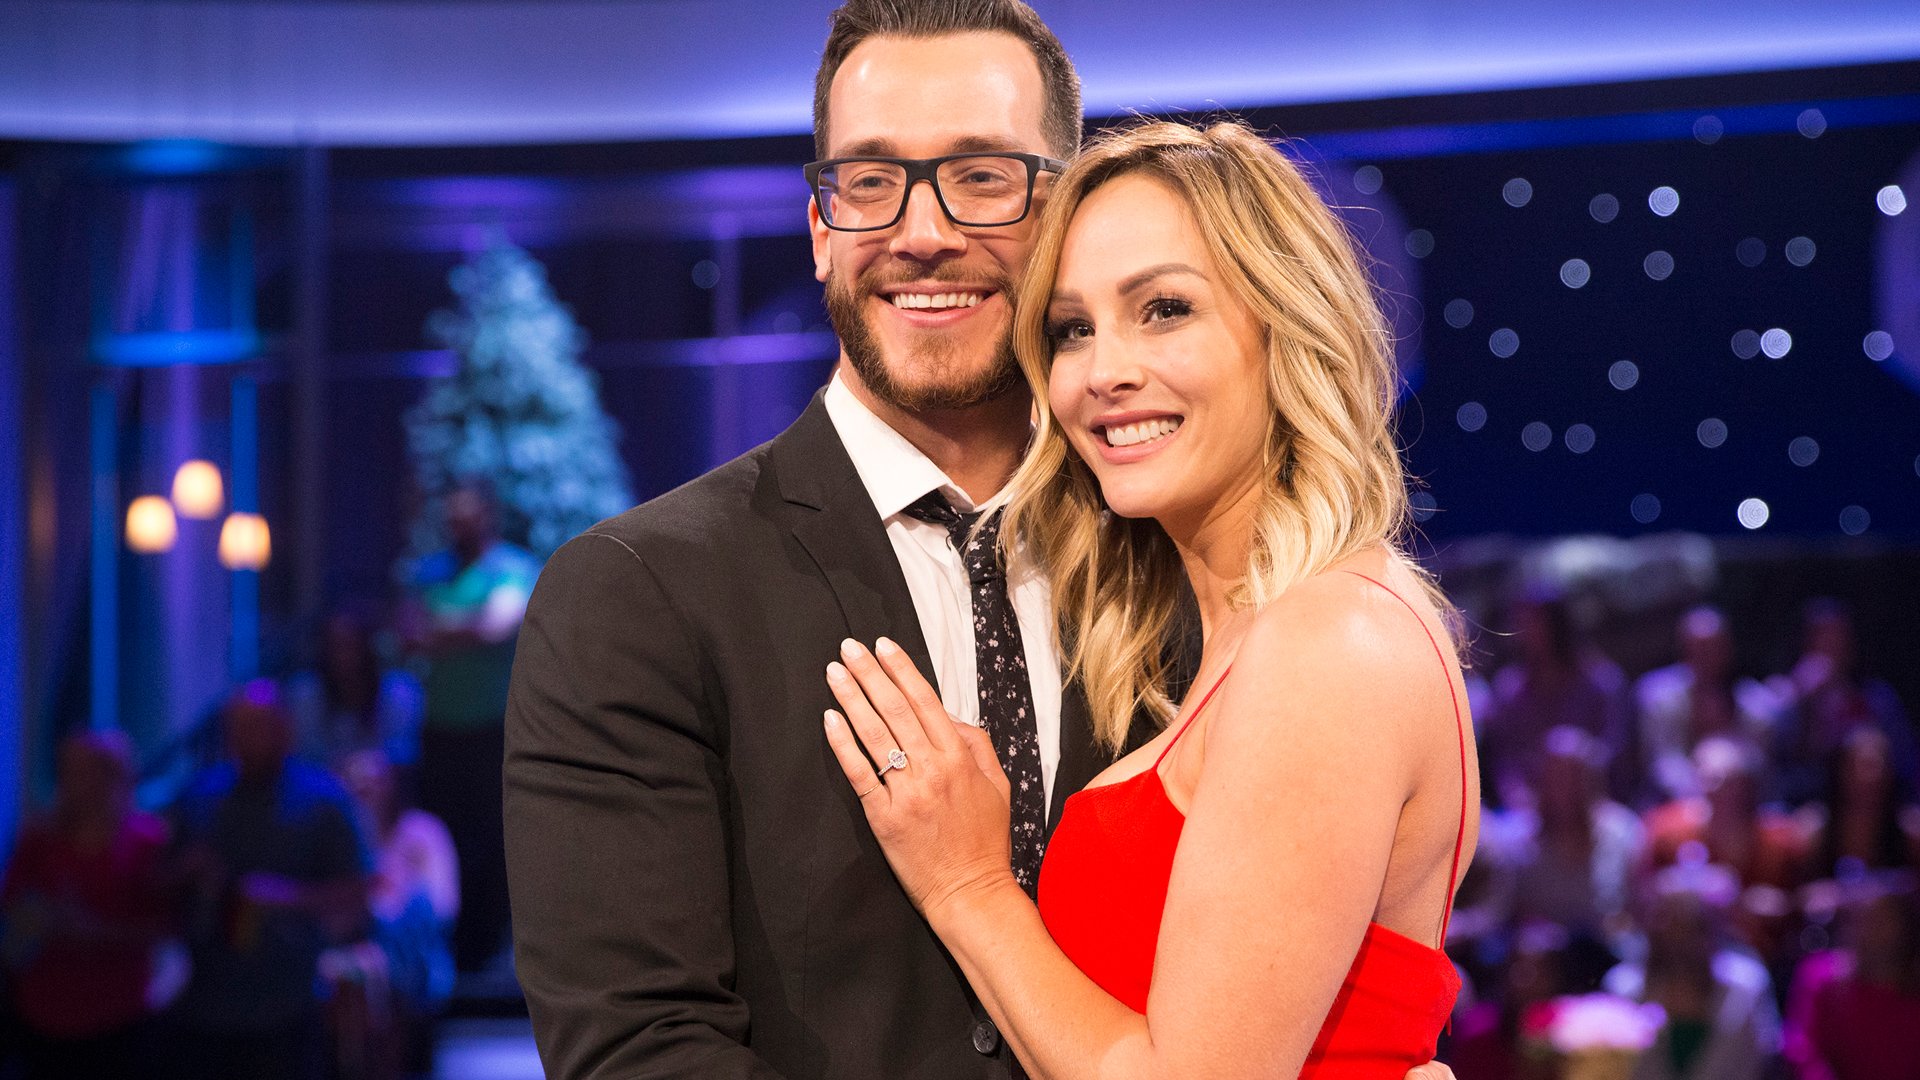 'The Bachelorette' Season 16 star Clare Crawley and Benoit Beauséjour-Savard get engaged on 'The Bachelor Winter Games' in 2019